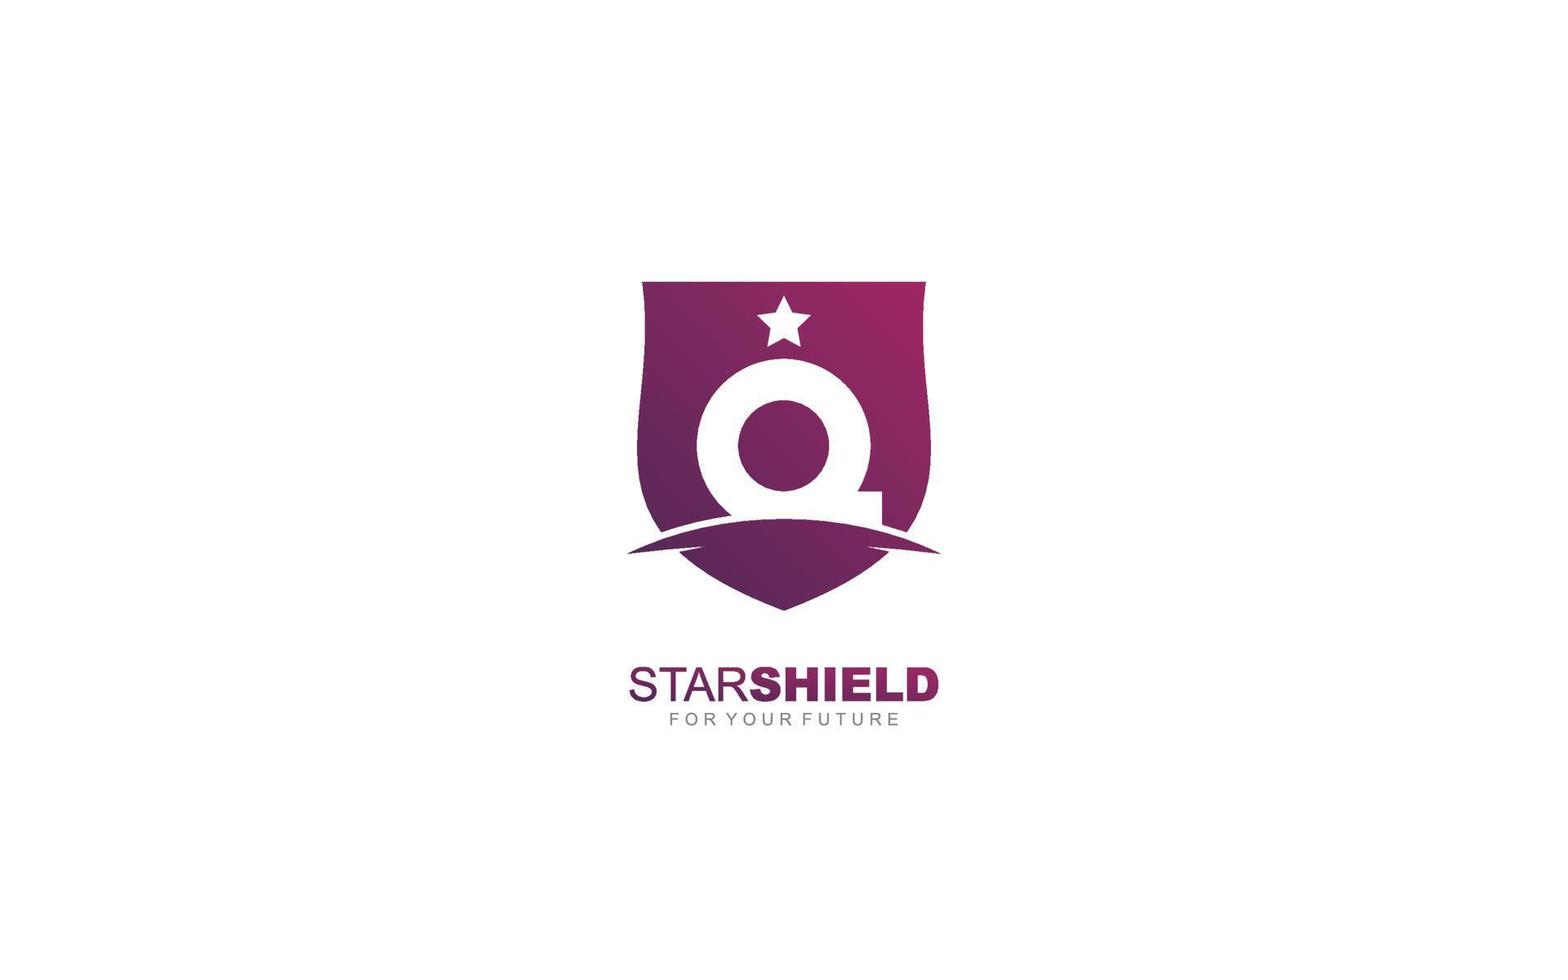 Q logo shield for branding company. security template vector illustration for your brand.